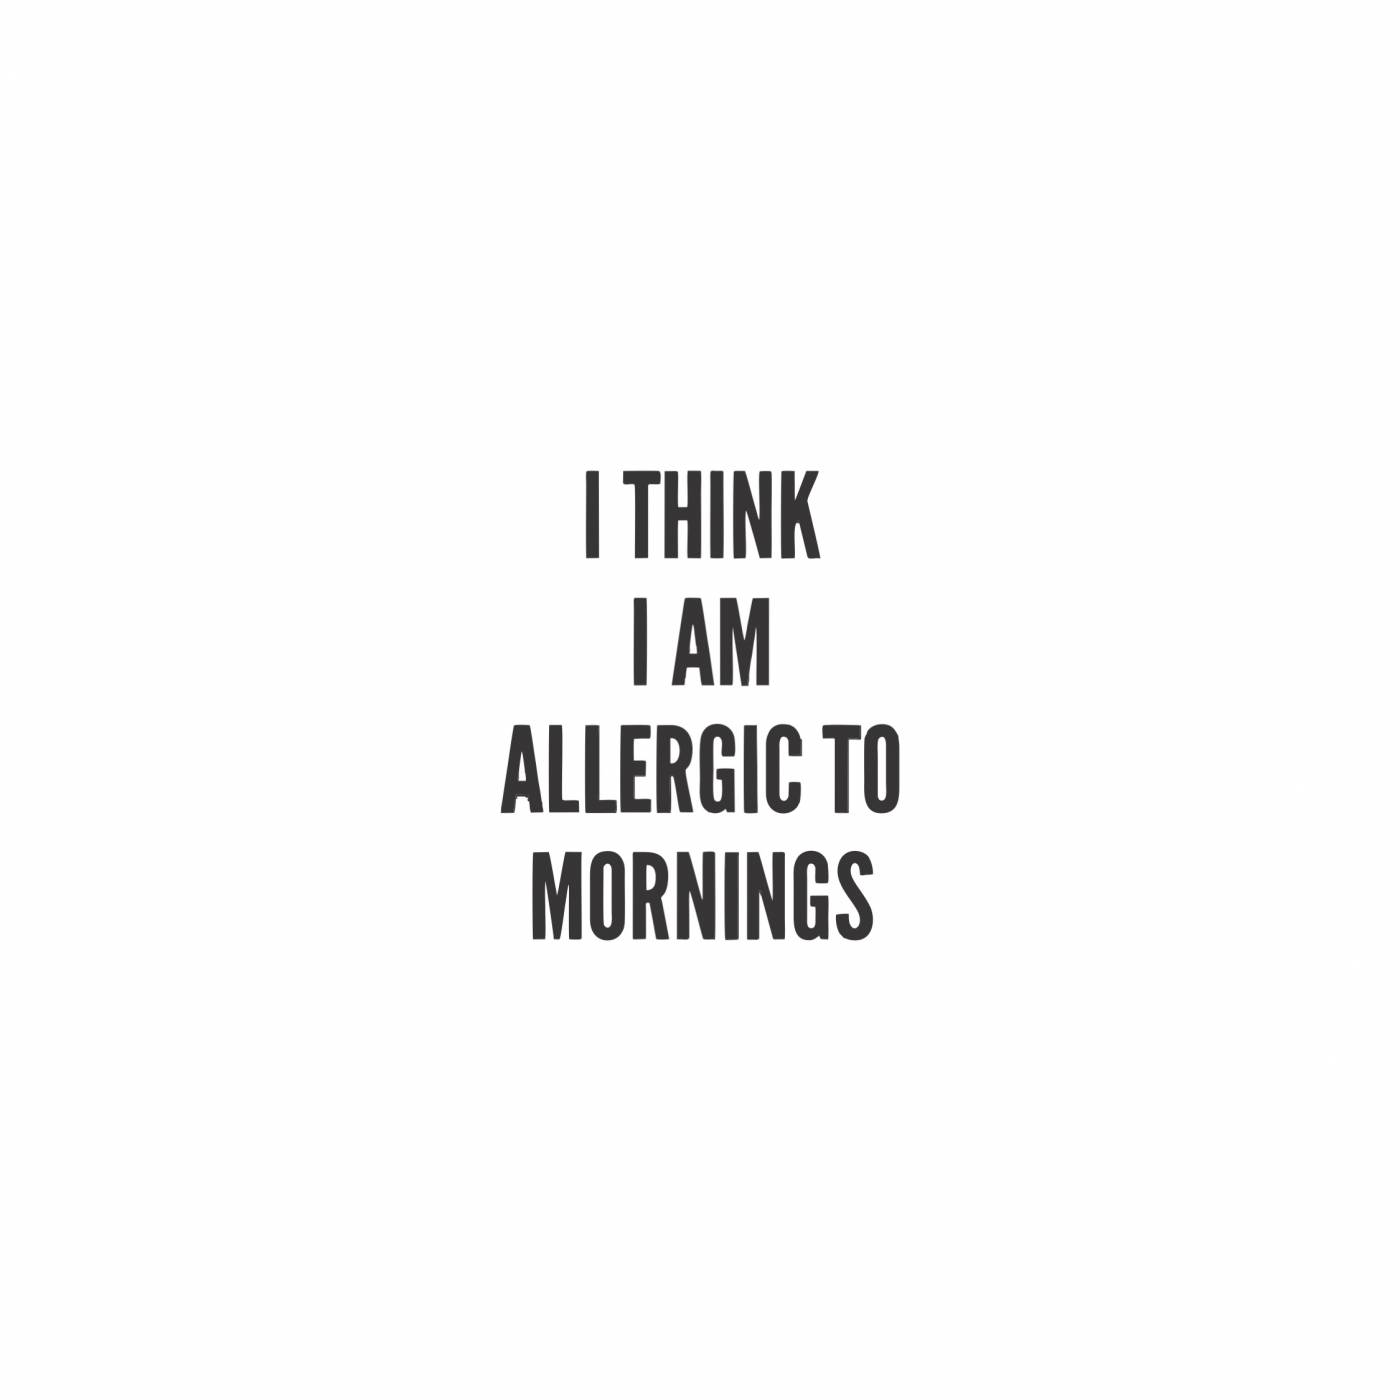 Allergic to morning